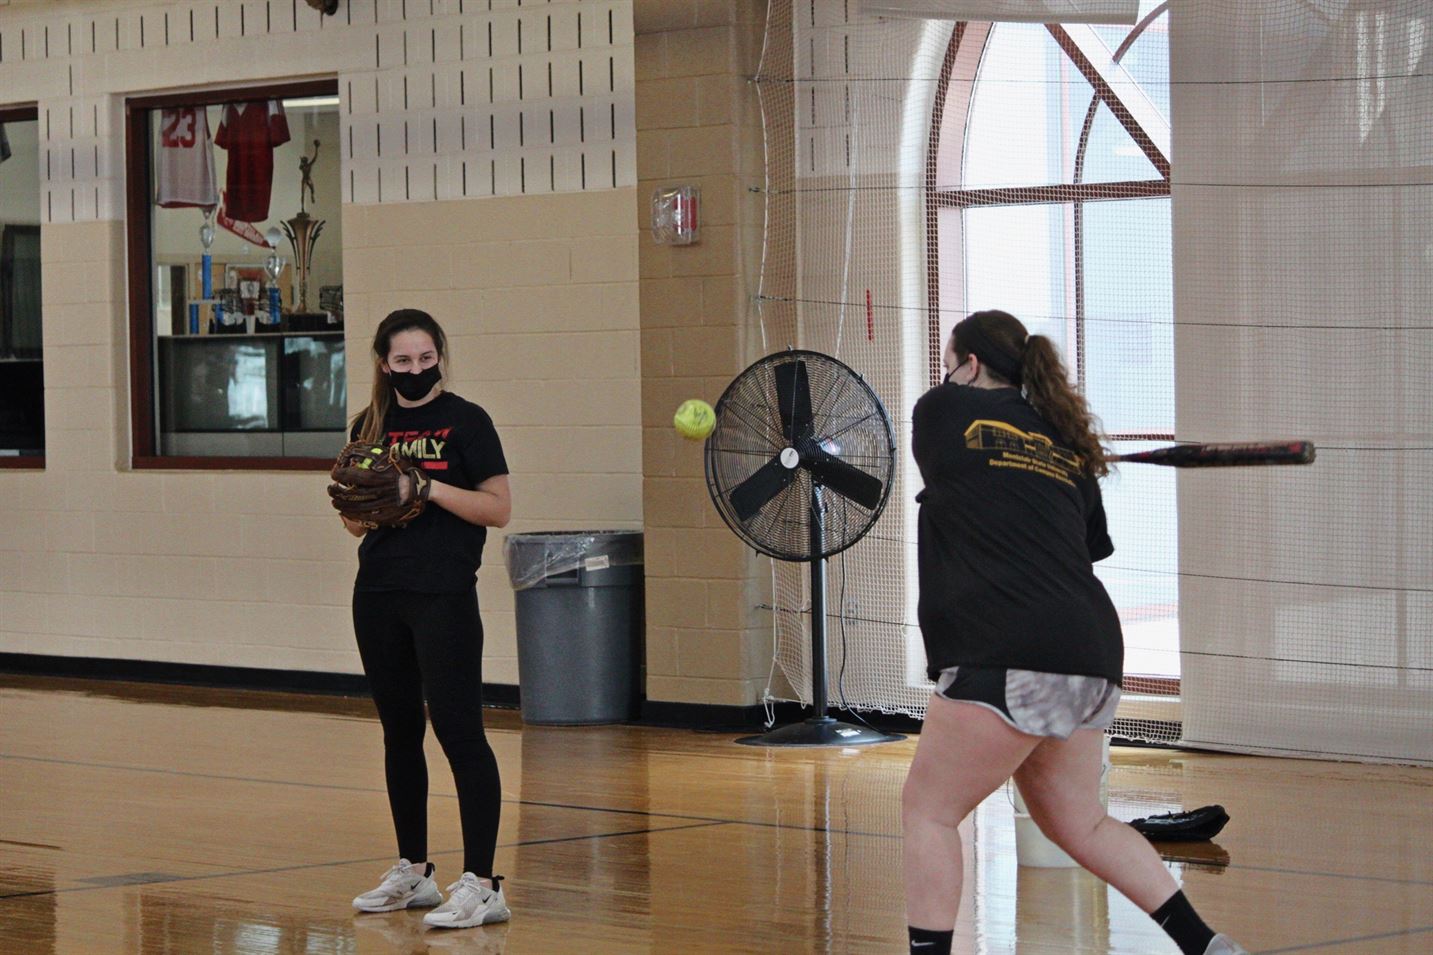 Hailey Farrell (left) watches teammate Tina Ilkow (right) bat for their teammates to warm up their pitches. Avery Nixon | The Montclarion